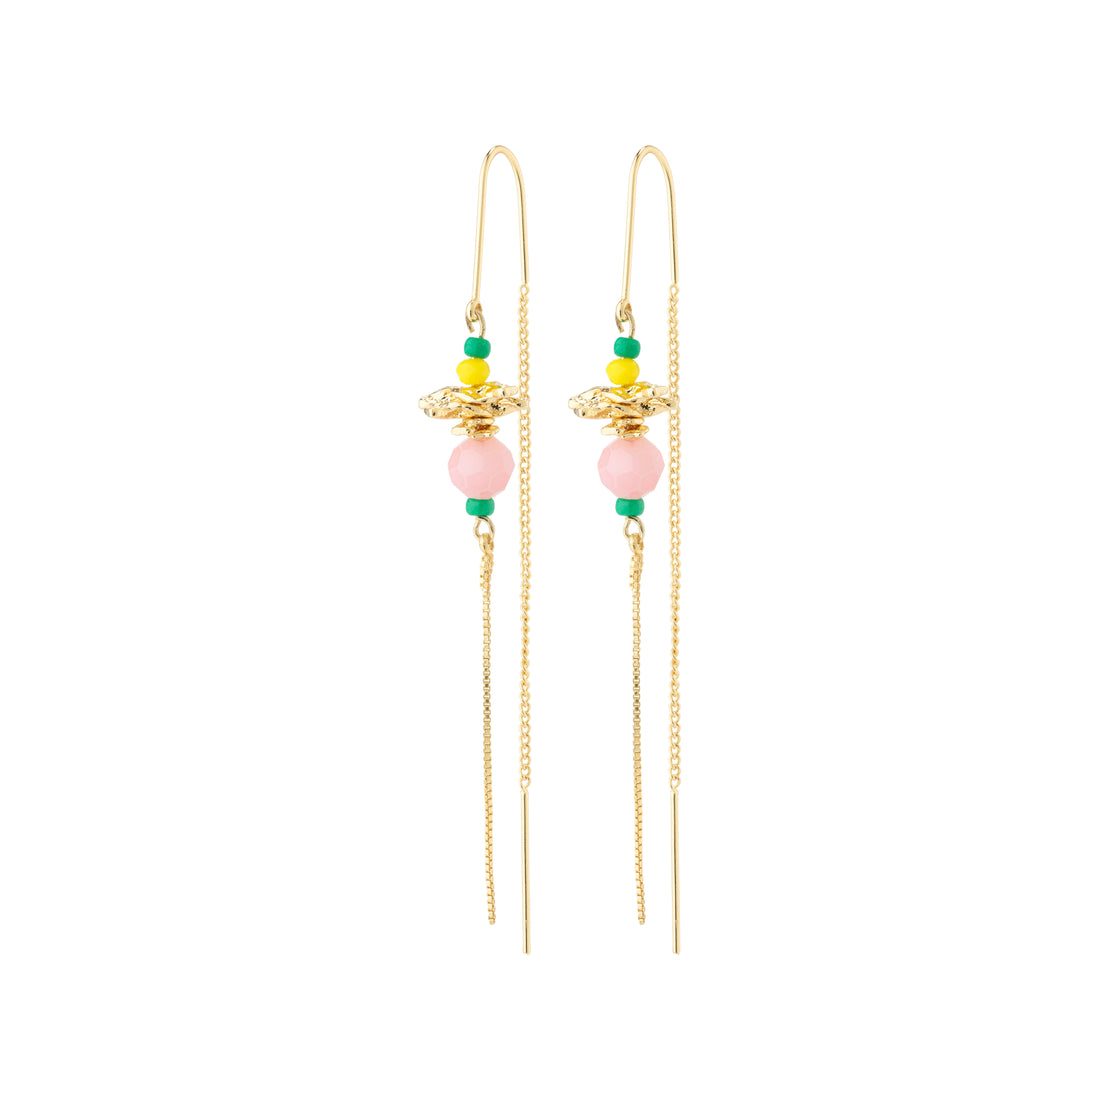 PAUSE multicolored chain earrings